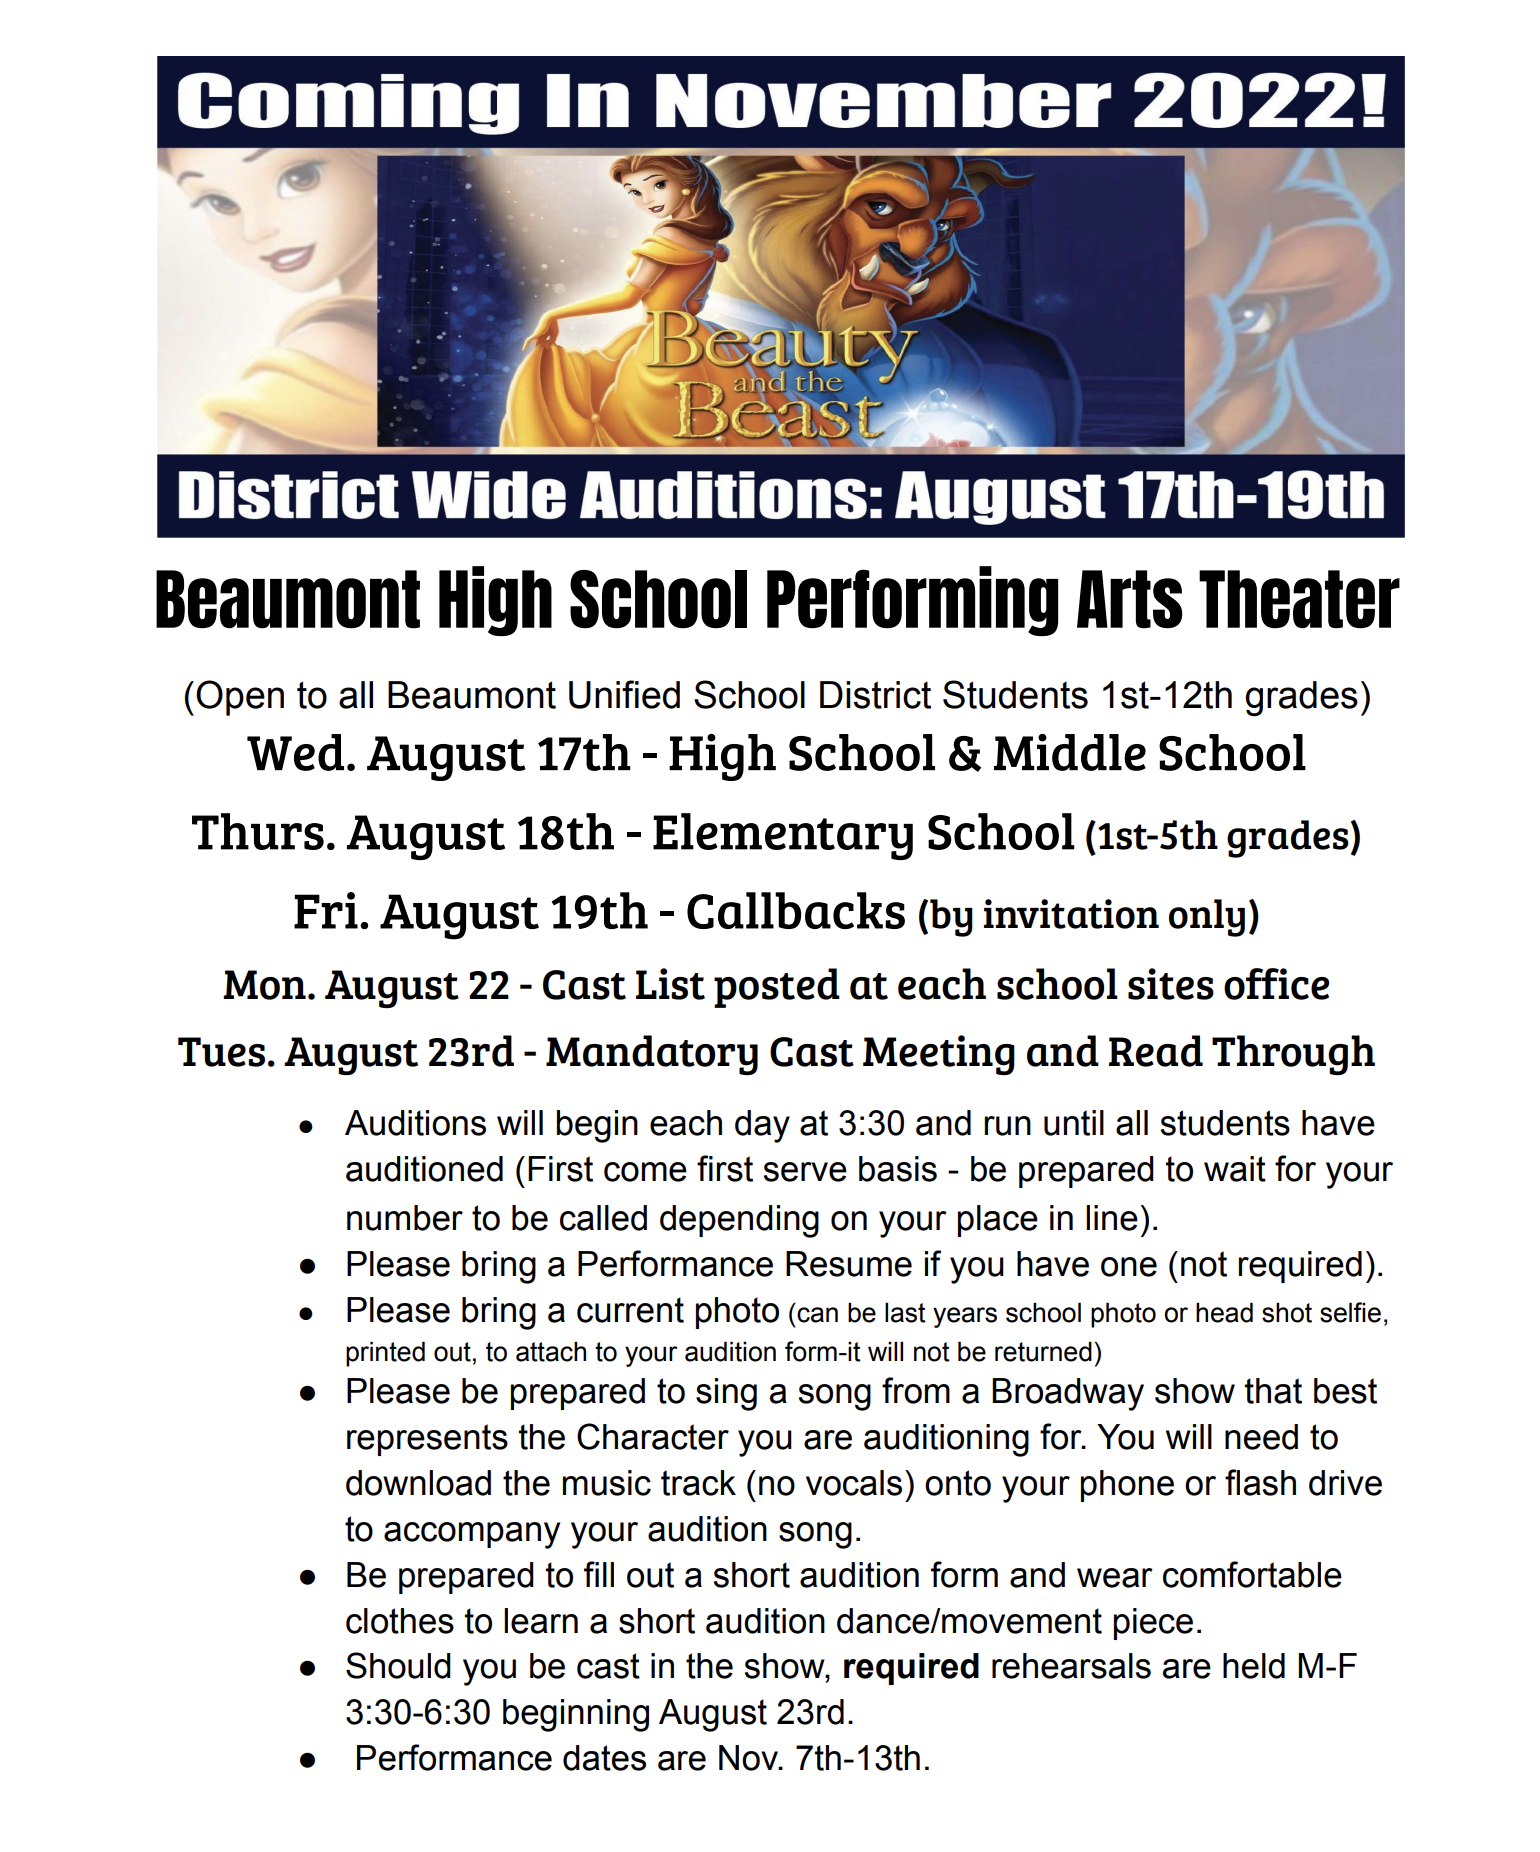 Flyer with image of Beauty and the Beast with information on auditions.